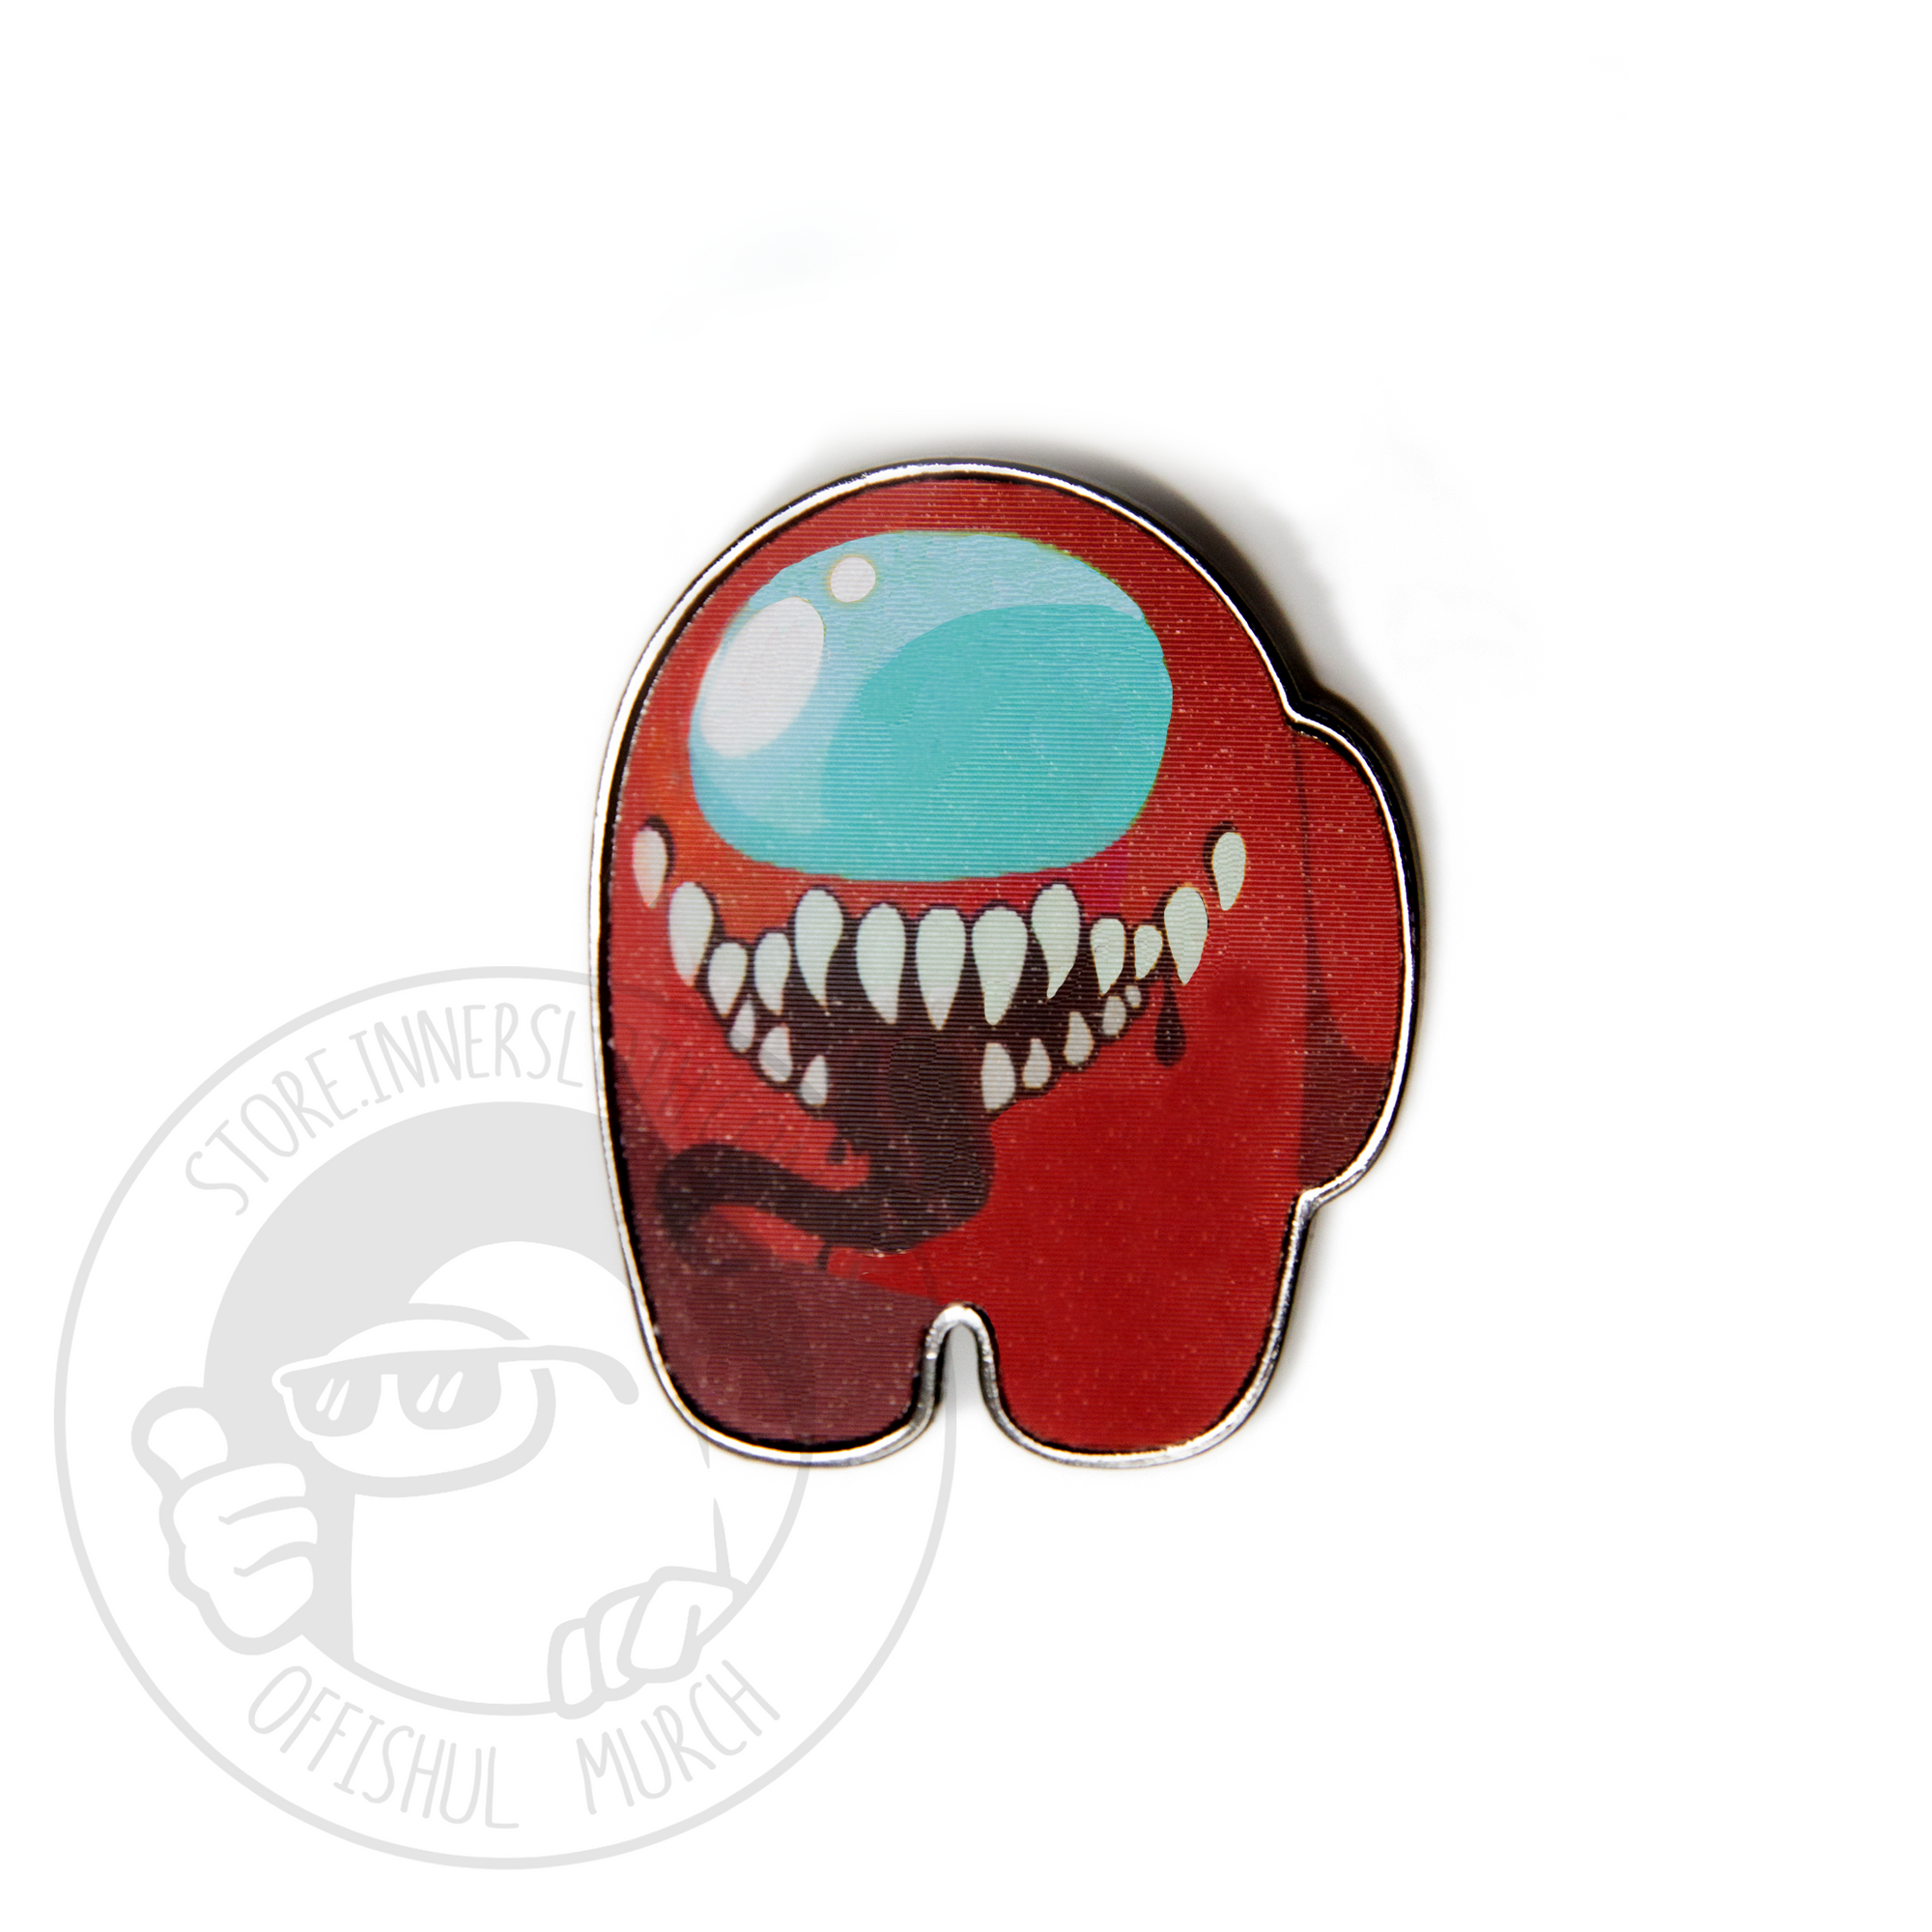 An animated gif of the lenticular impostor pin, which shows a red crewmate. The image dissolves back and forth showing the red crewmate, and then the red Impostor with grinning sharp teeth and tongue.